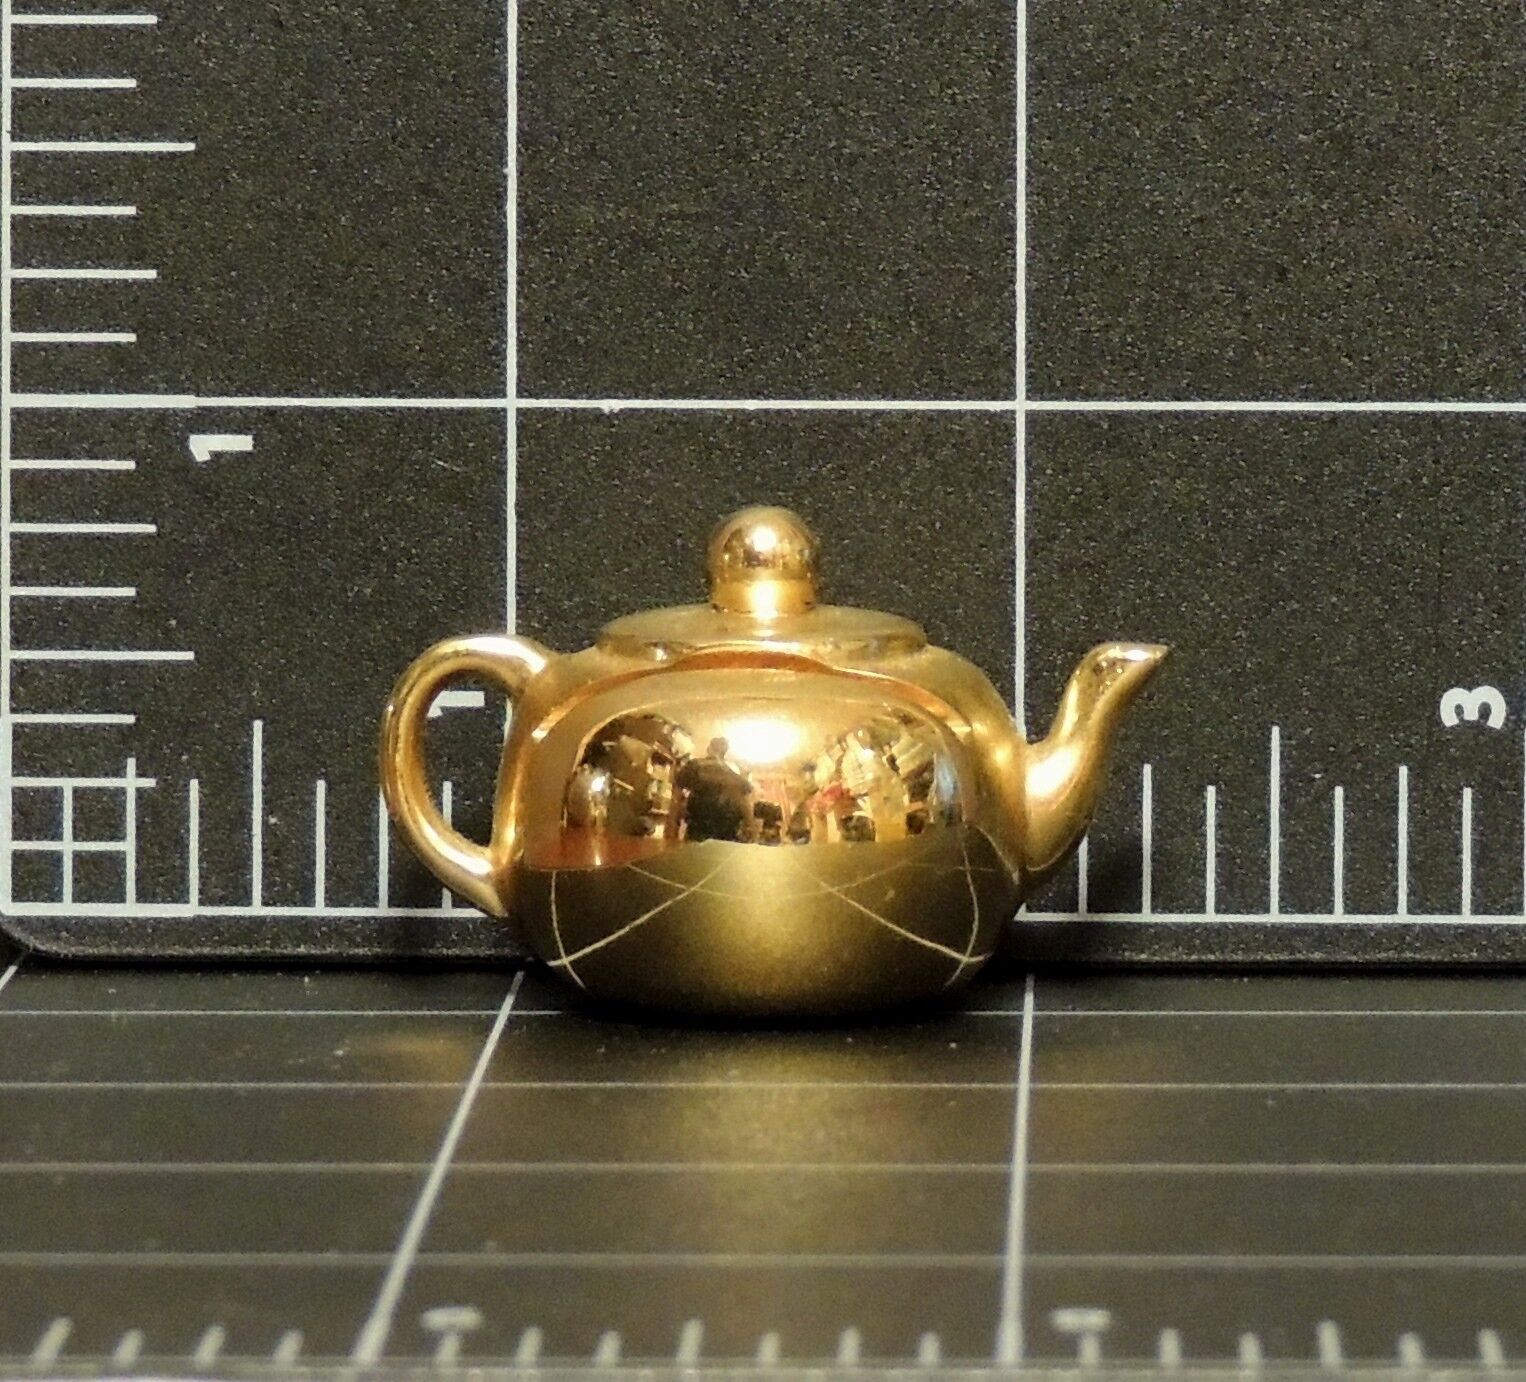 Miniature Solid Brass Teapot Business Card Holder & Price or Description Display